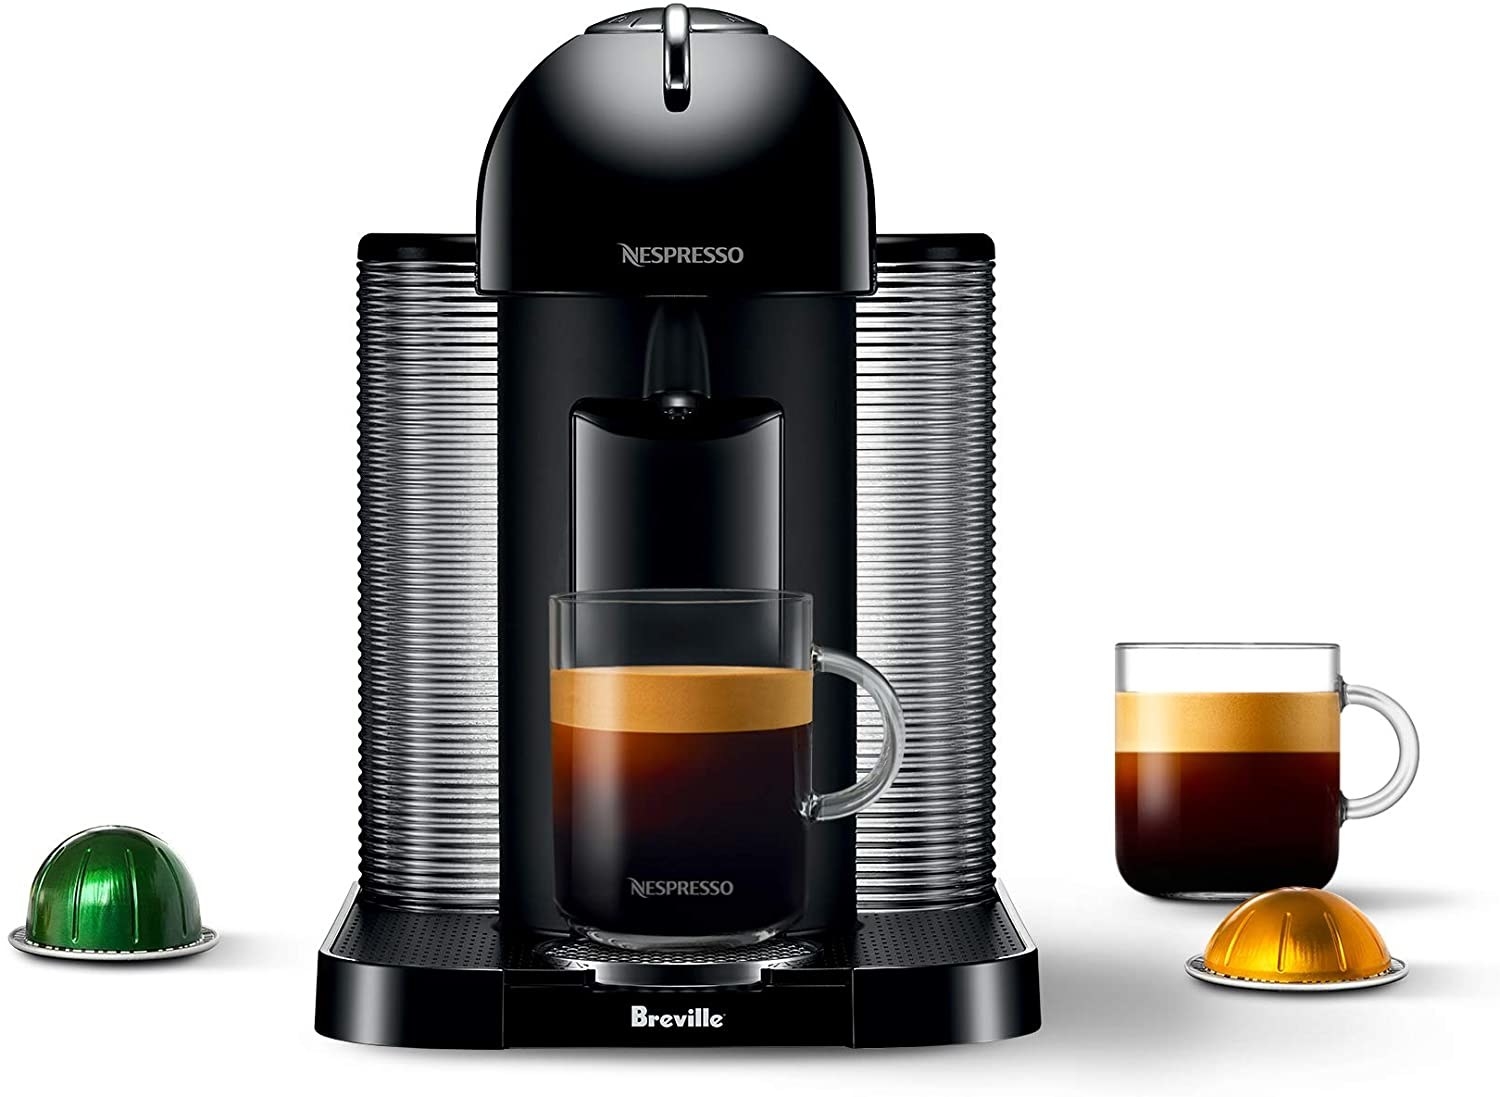 The Nespresso machine on a blank background with a cup off coffee on its platform